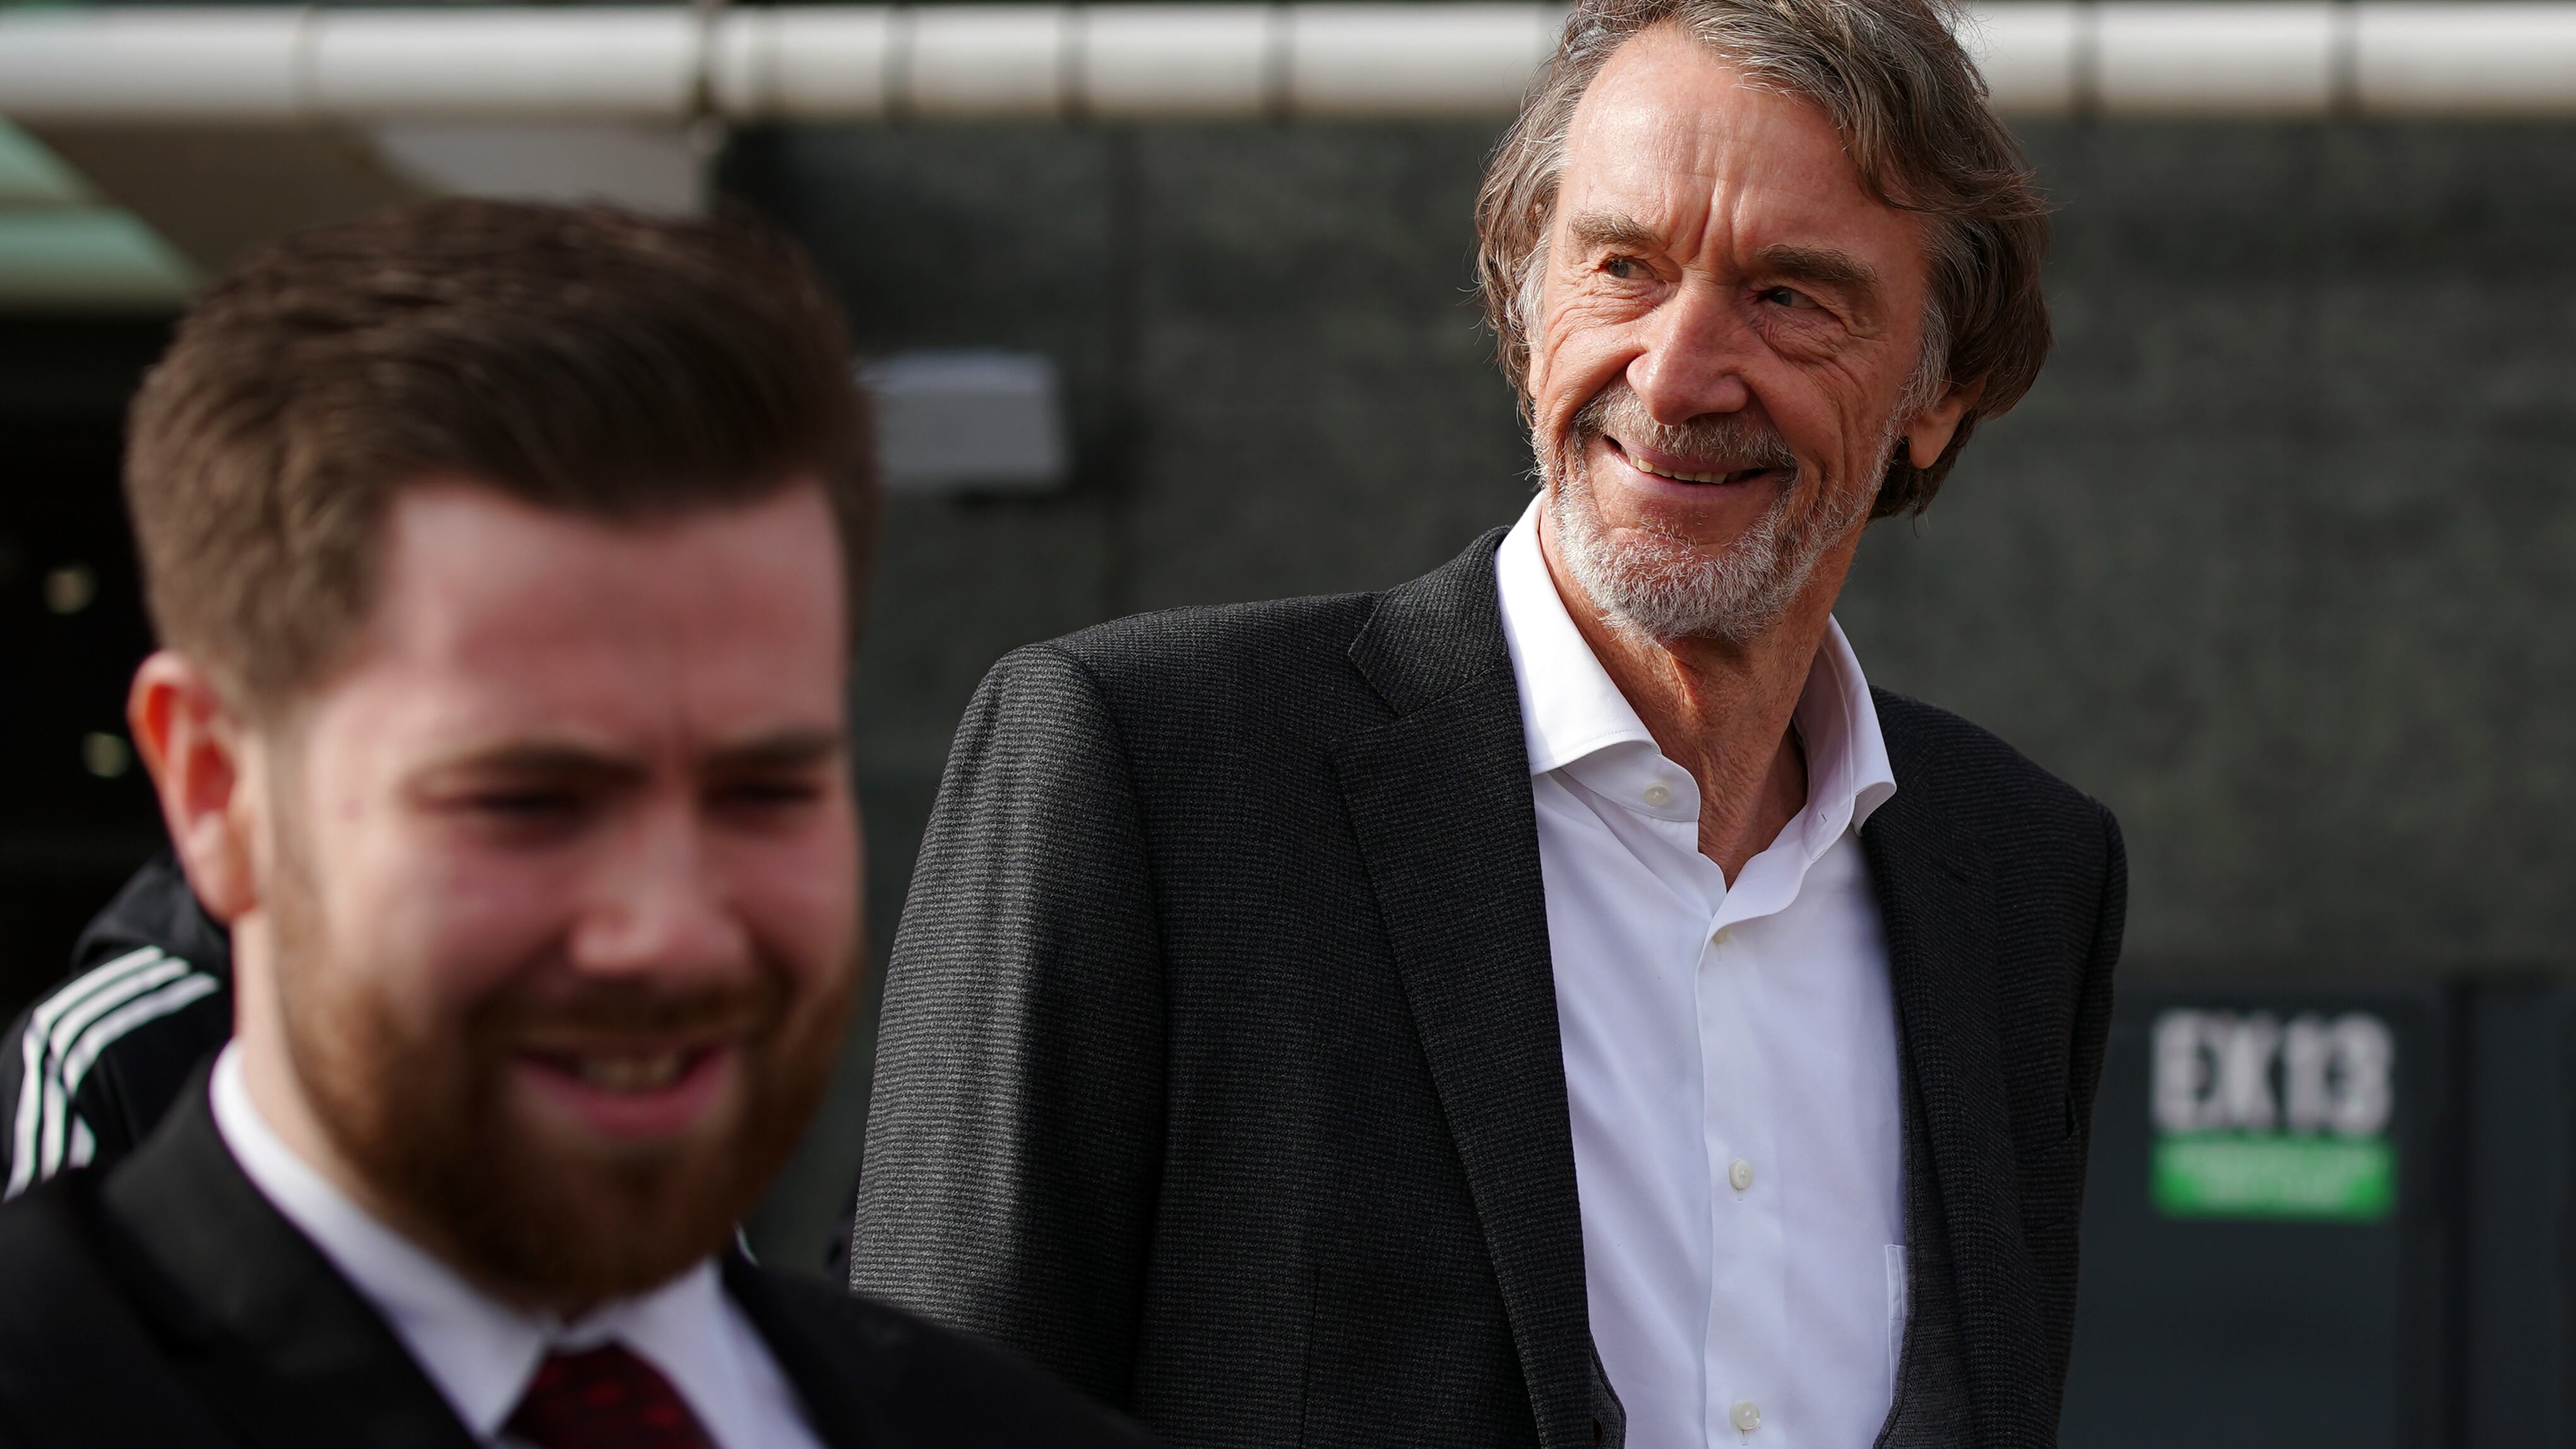 Sir Jim Ratcliffe held meetings at Old Trafford on Tuesday